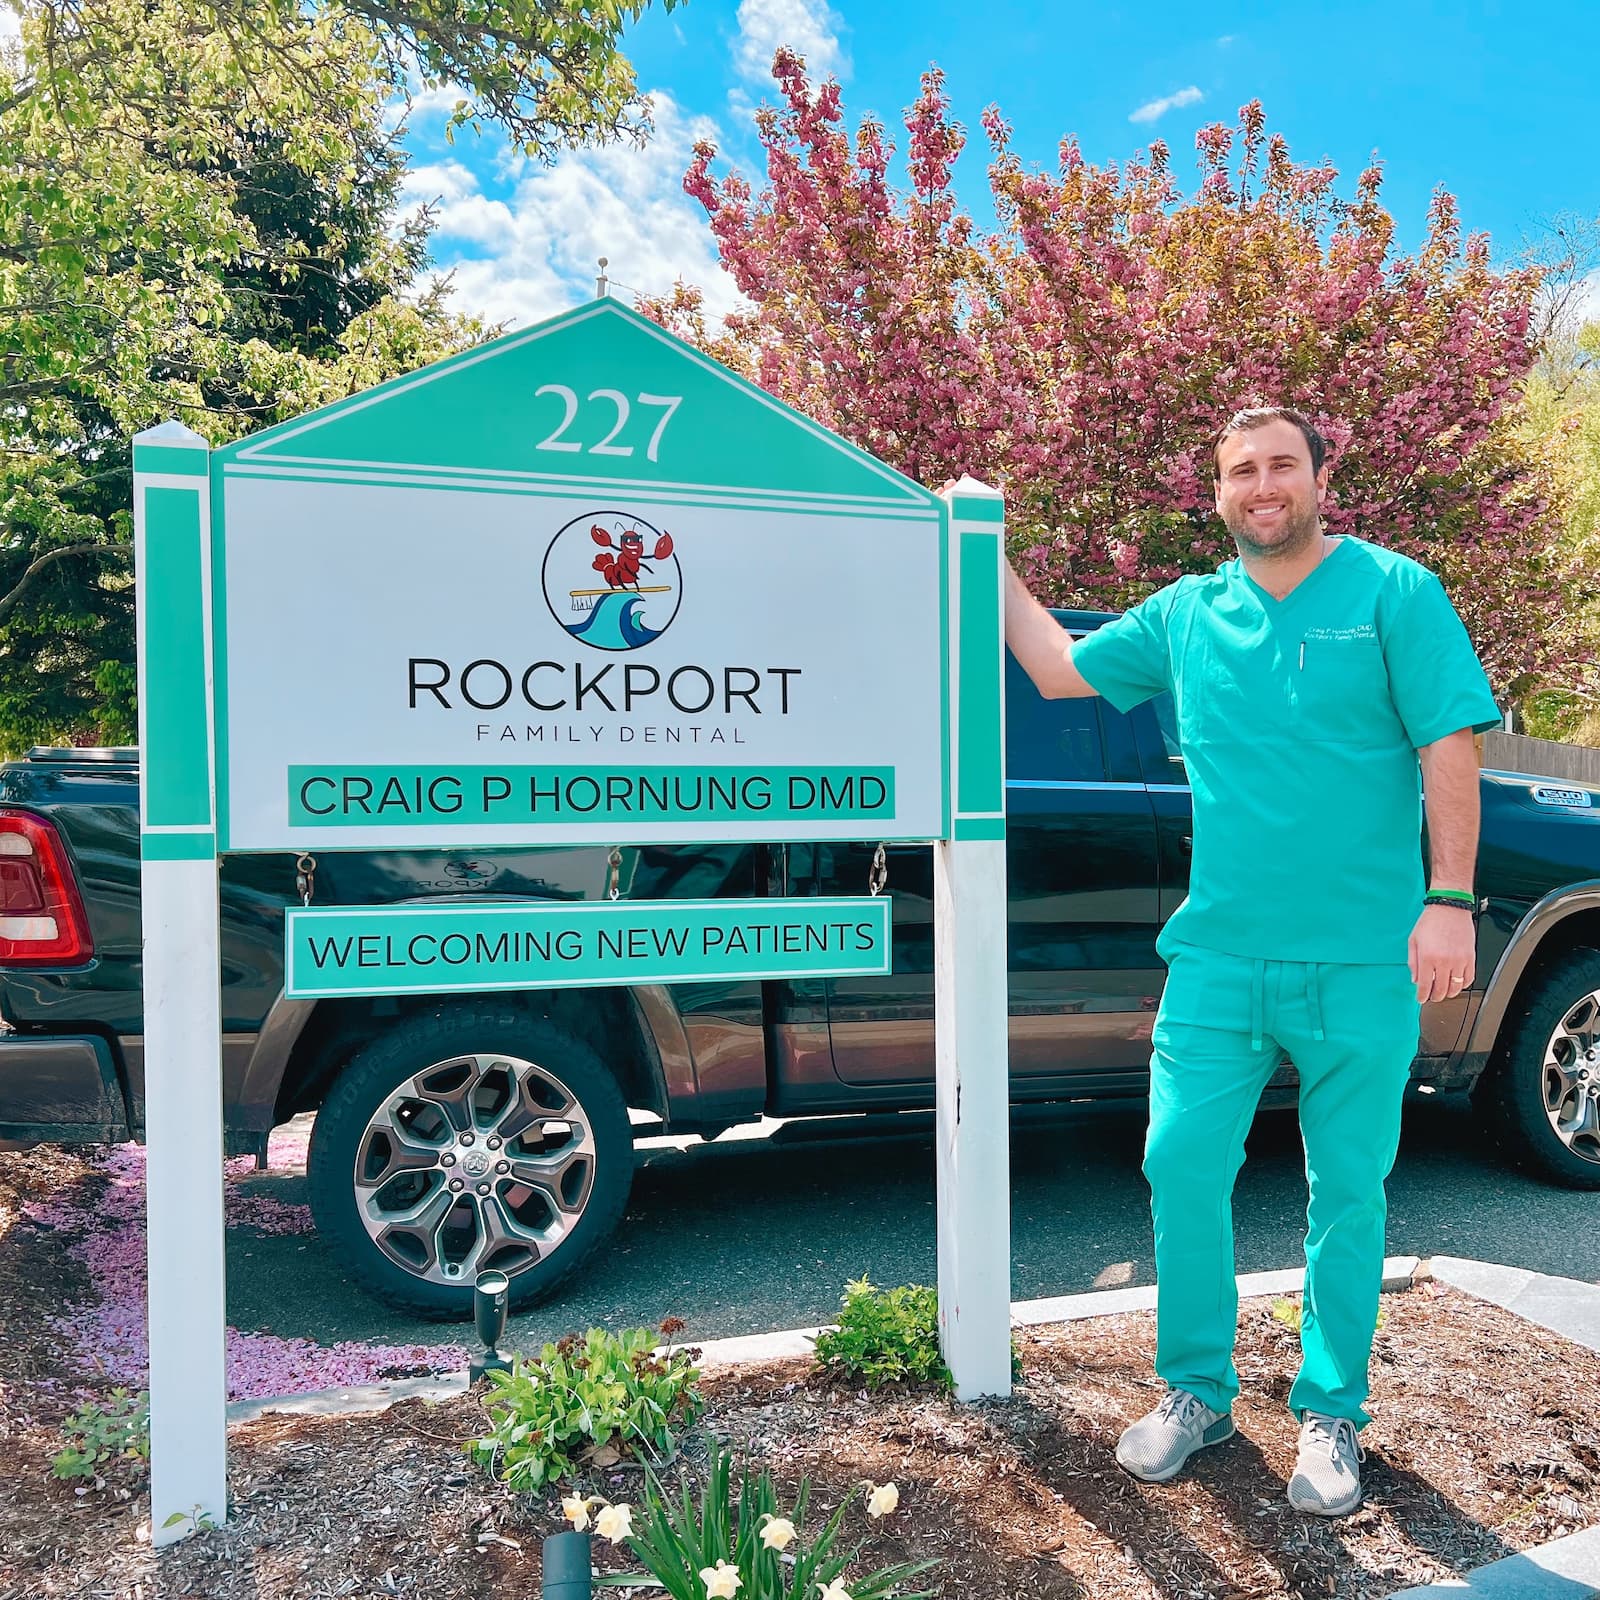 Dentist in Rockport, MA